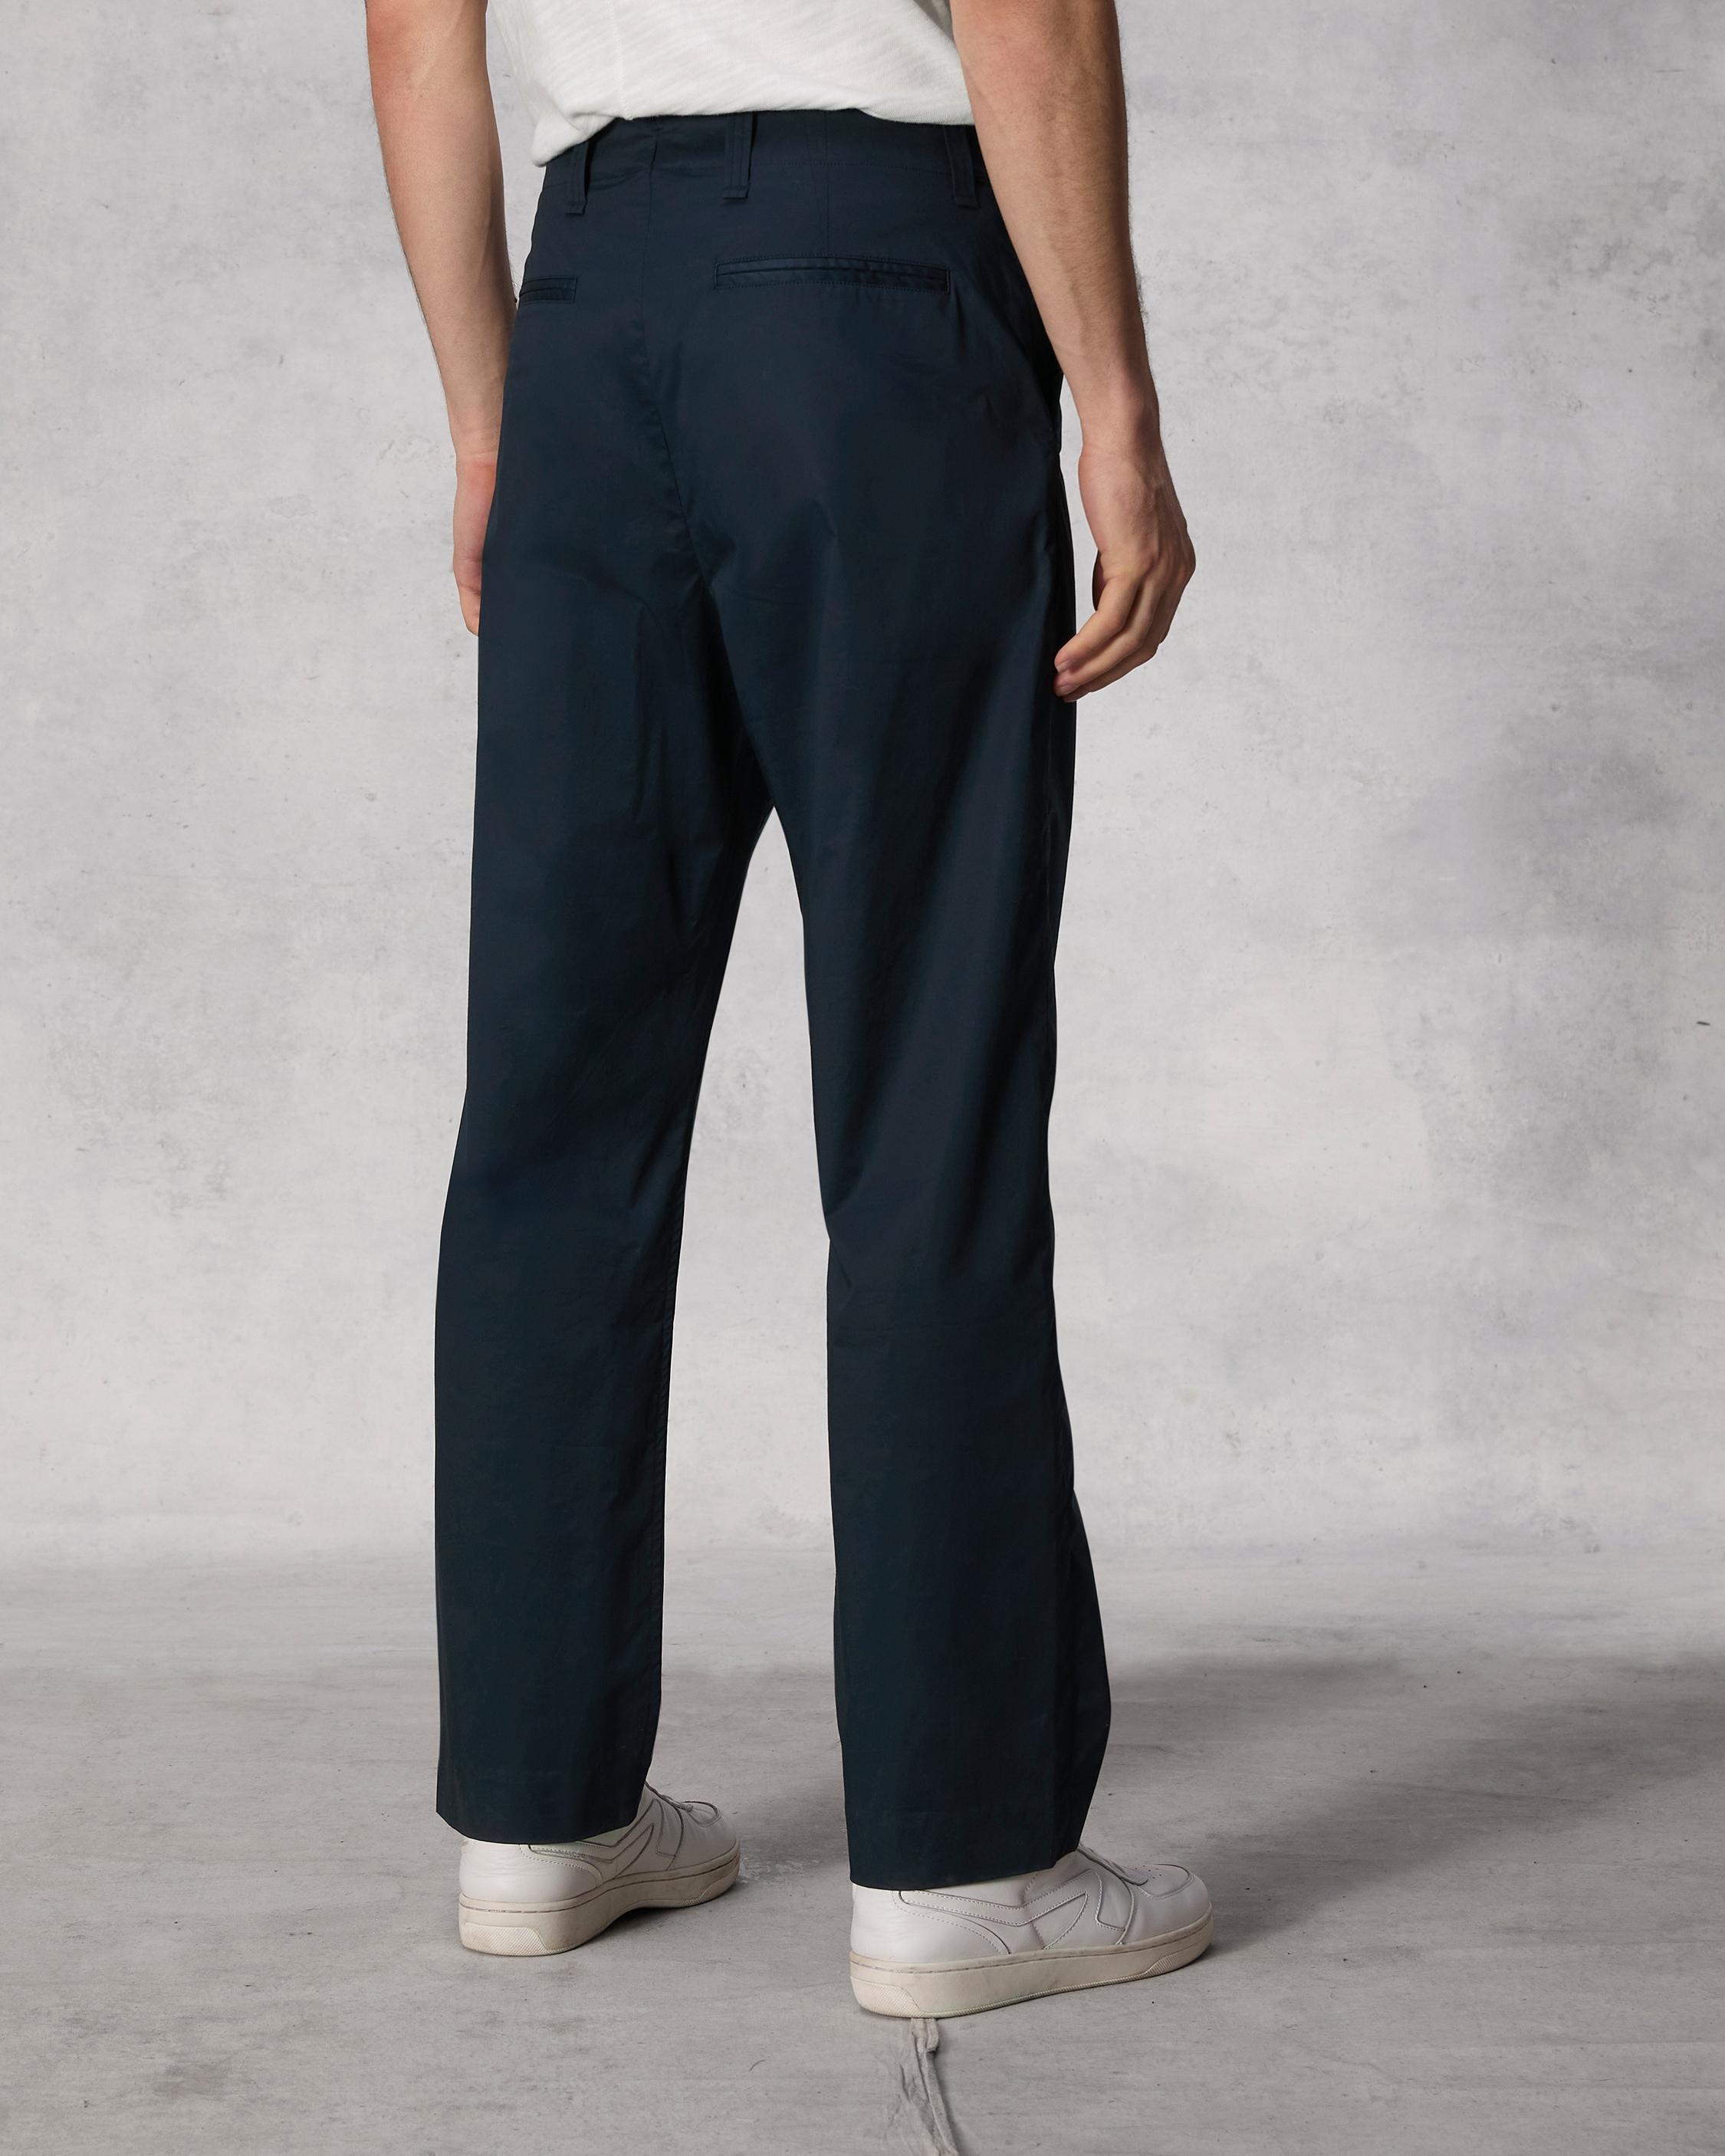 Bradford Cotton Poplin Pant
Relaxed Fit - 4